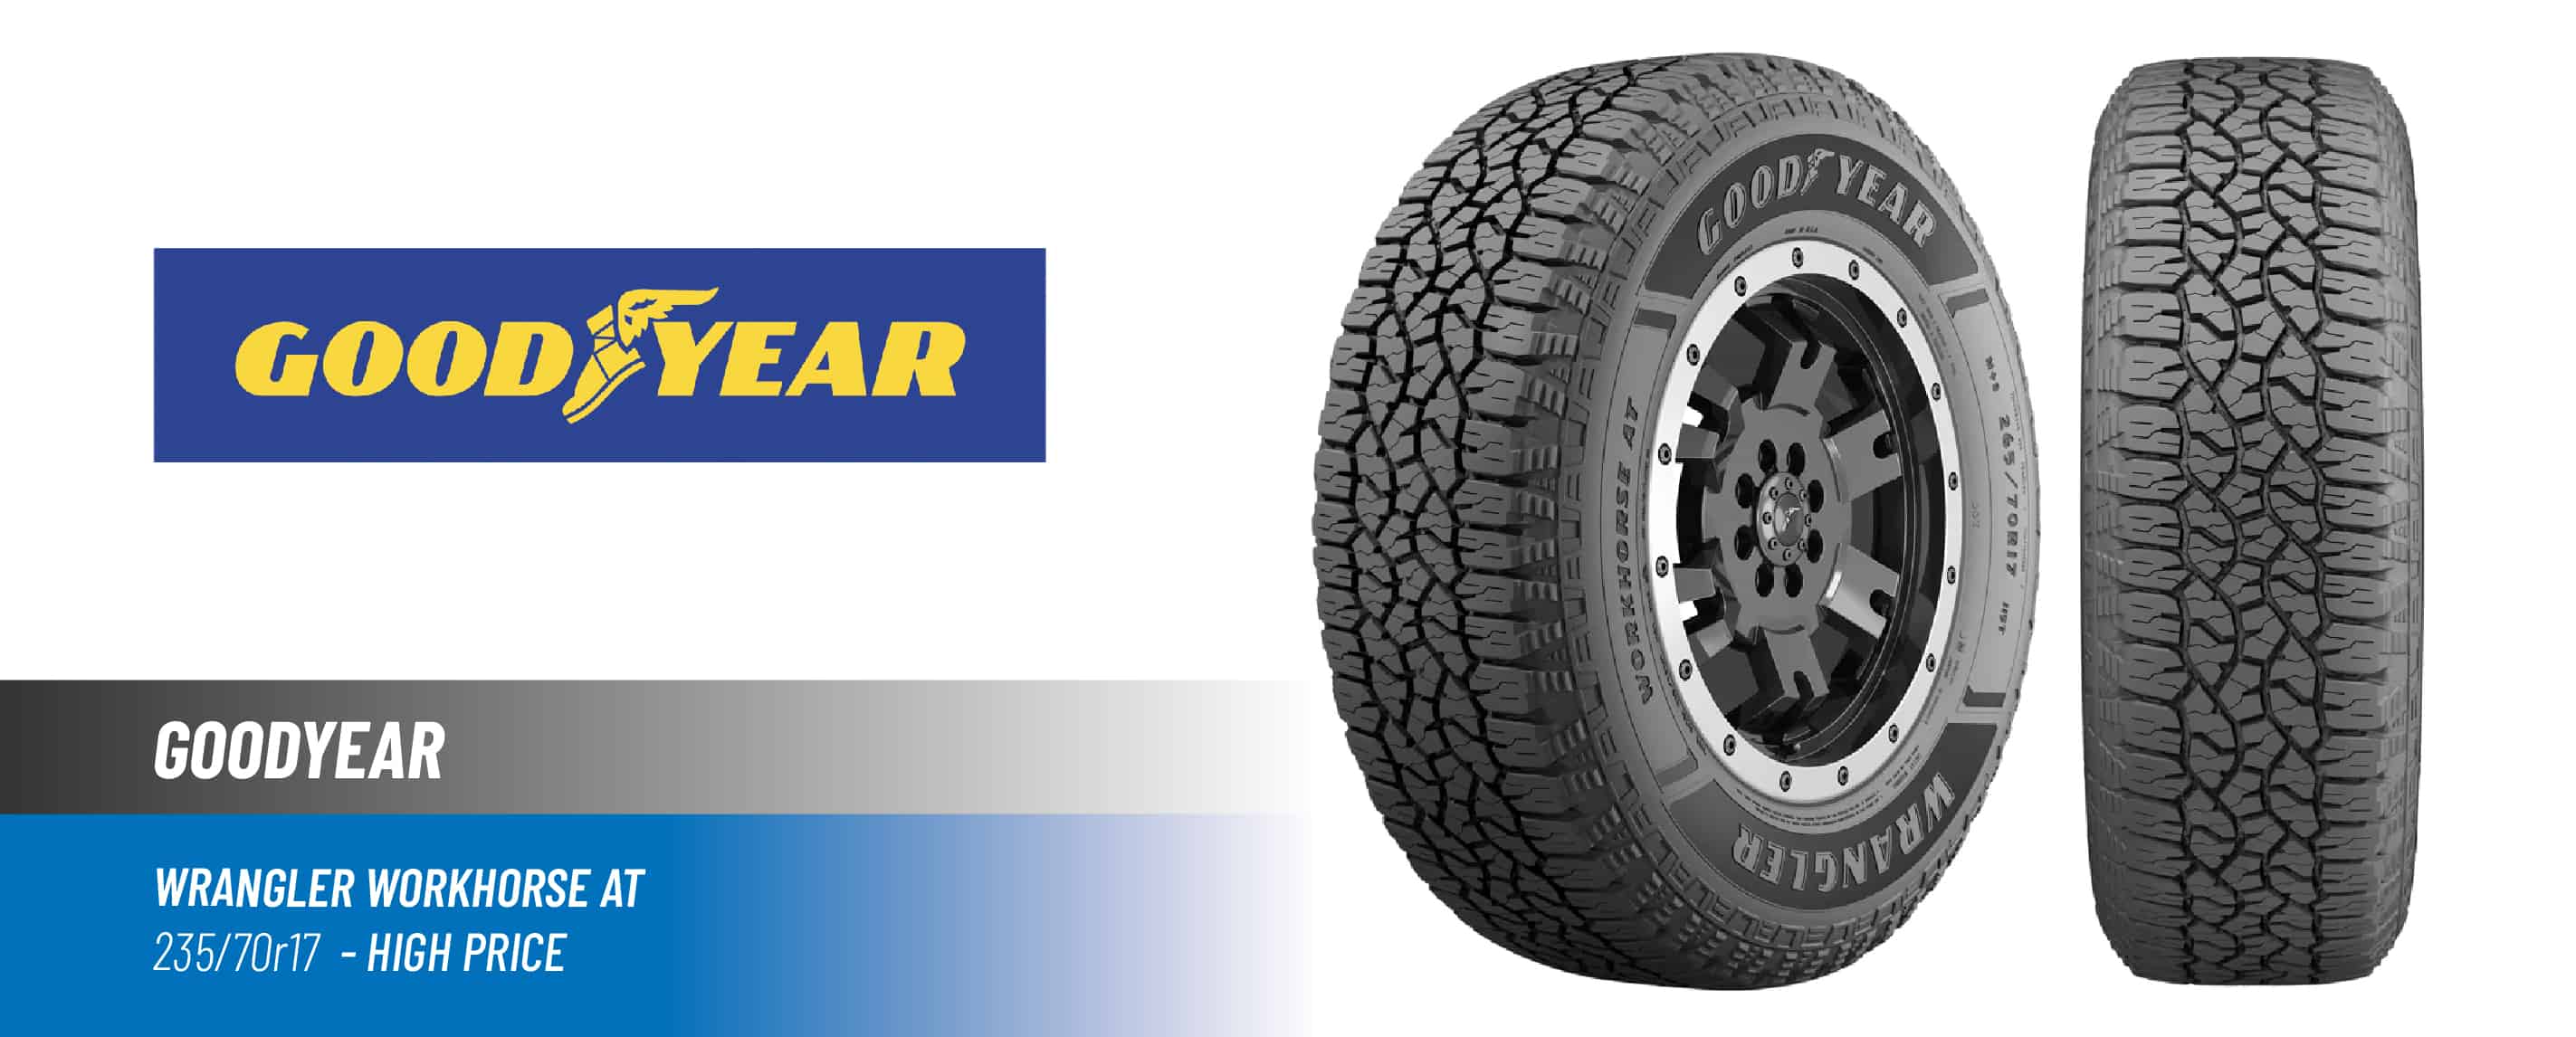 Top#3 High Price: Goodyear Wrangler Workhorse AT –best 235/70 R17